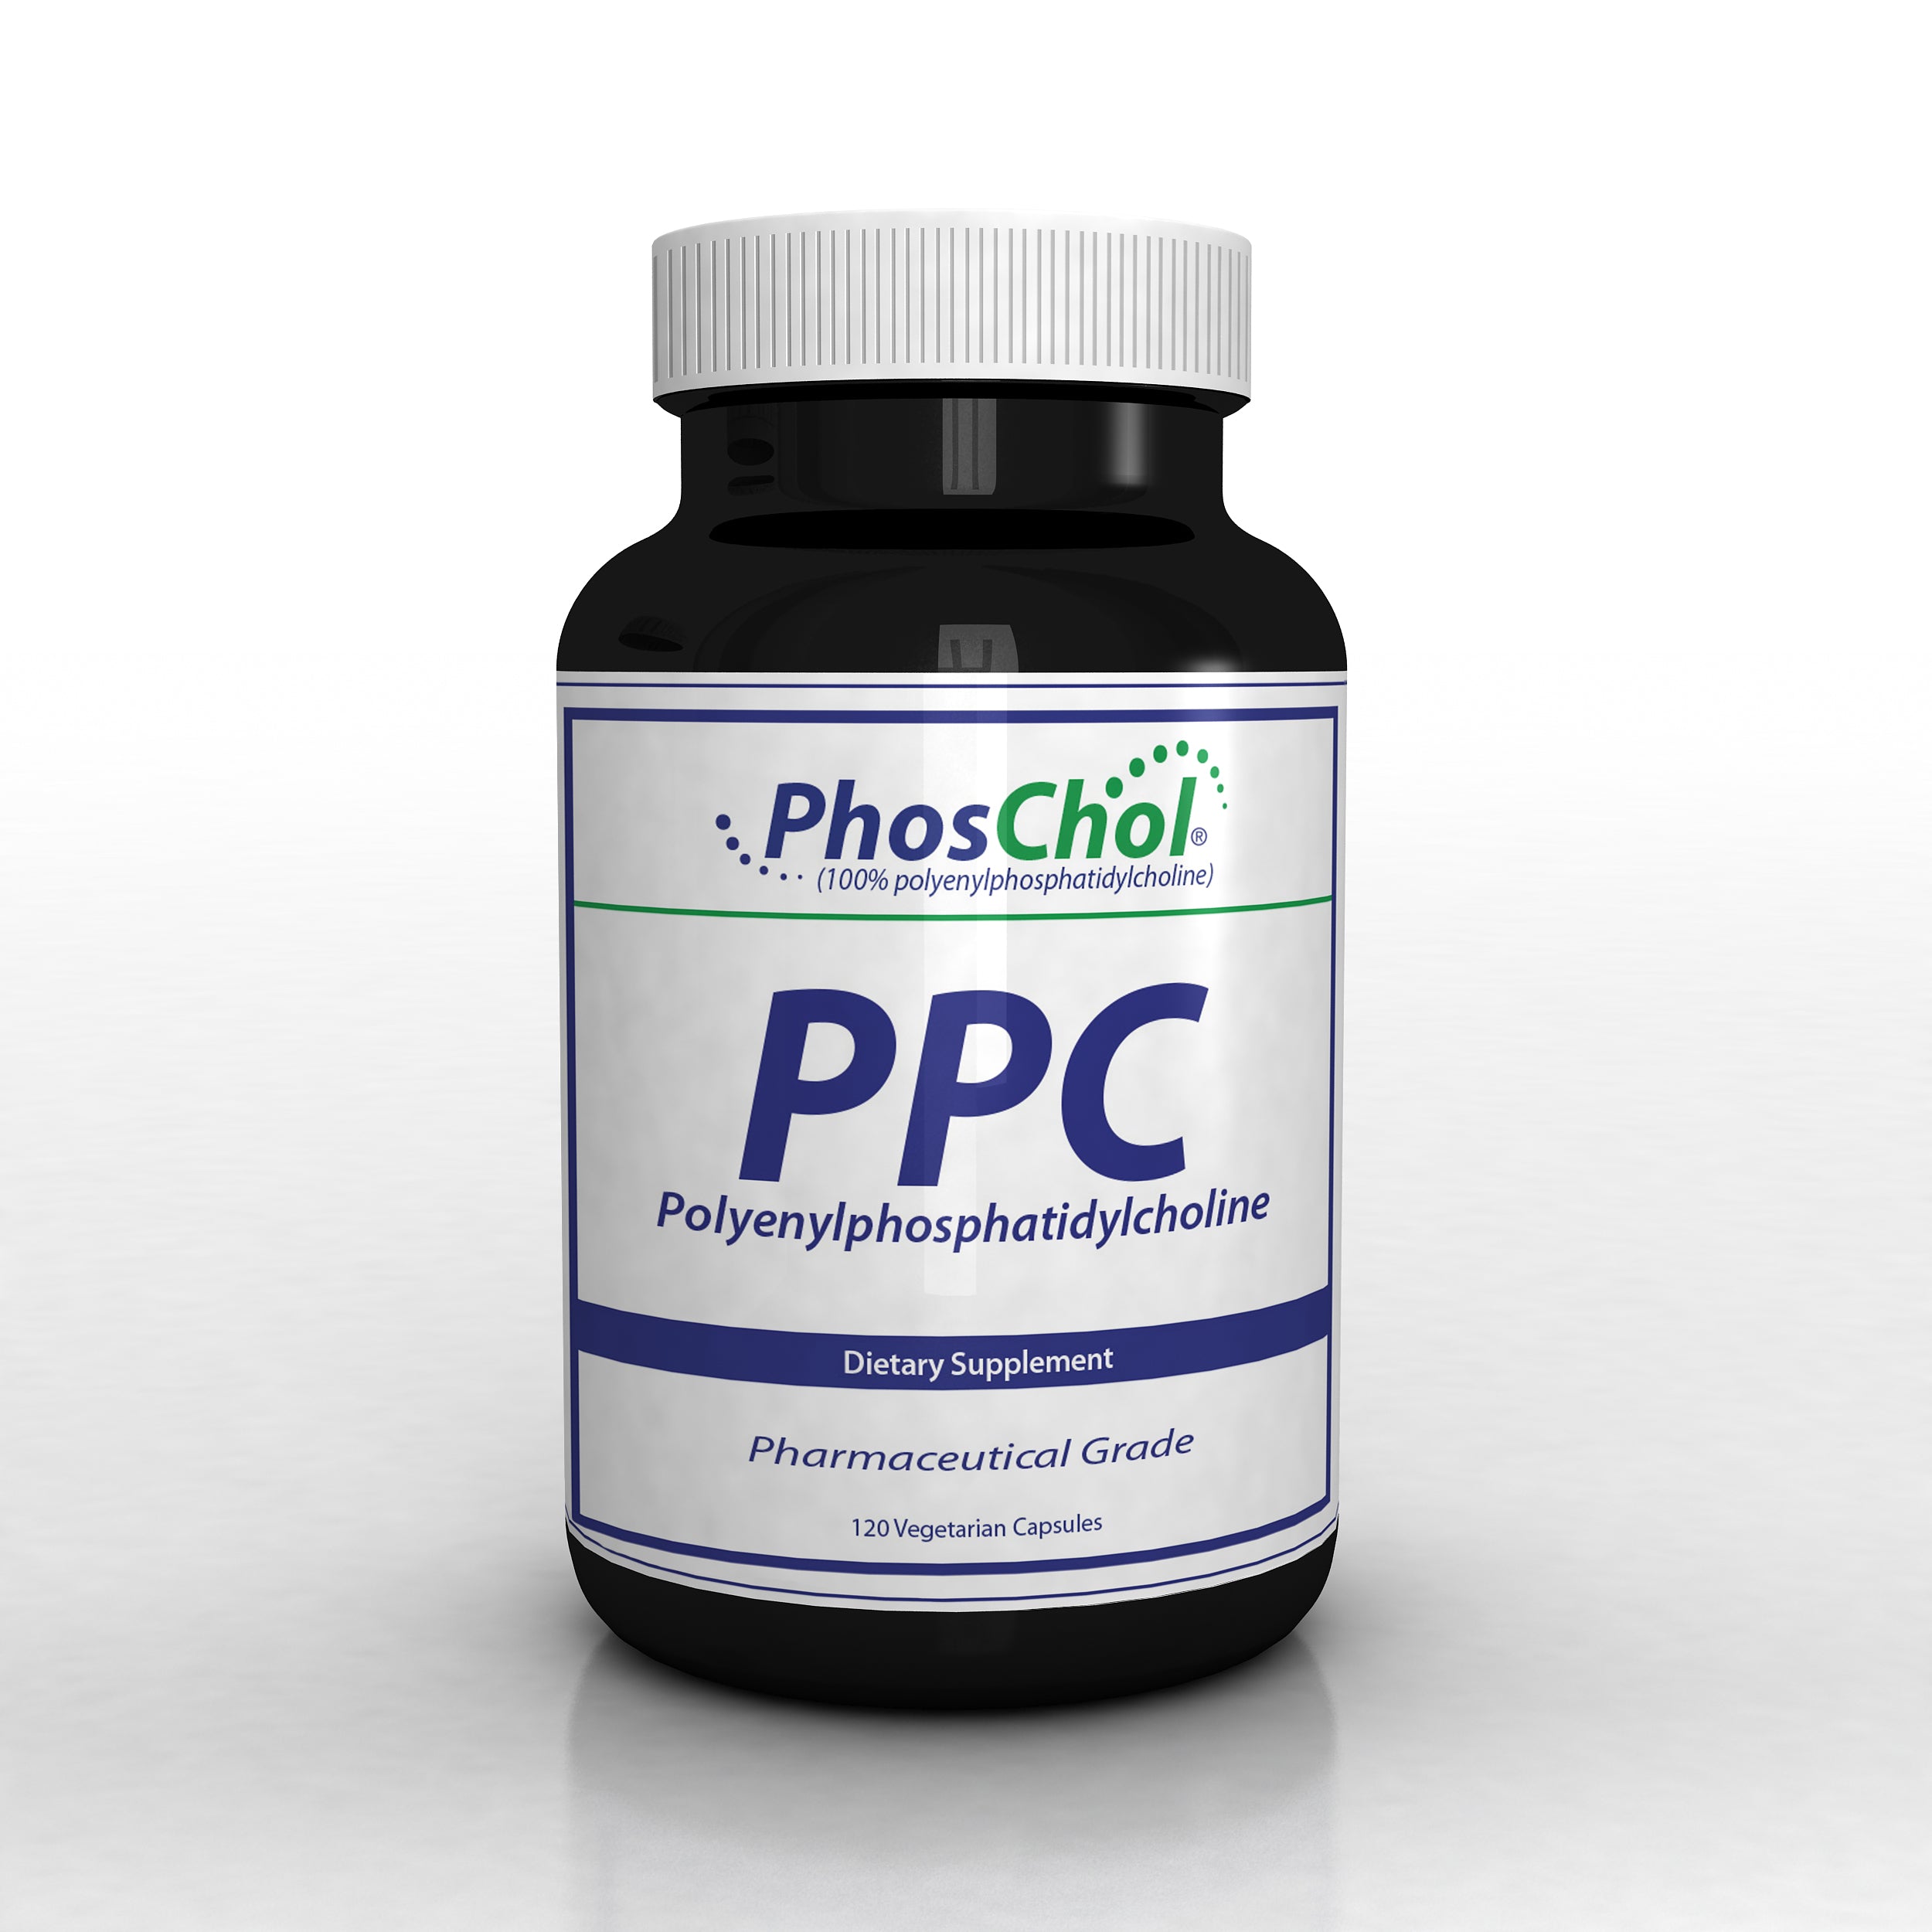 PhosChol 600 120ct. Veggie Cap Pharmaceutical Grade PPC For Cellular Repair and Healthy Gut, Liver, Brain Function